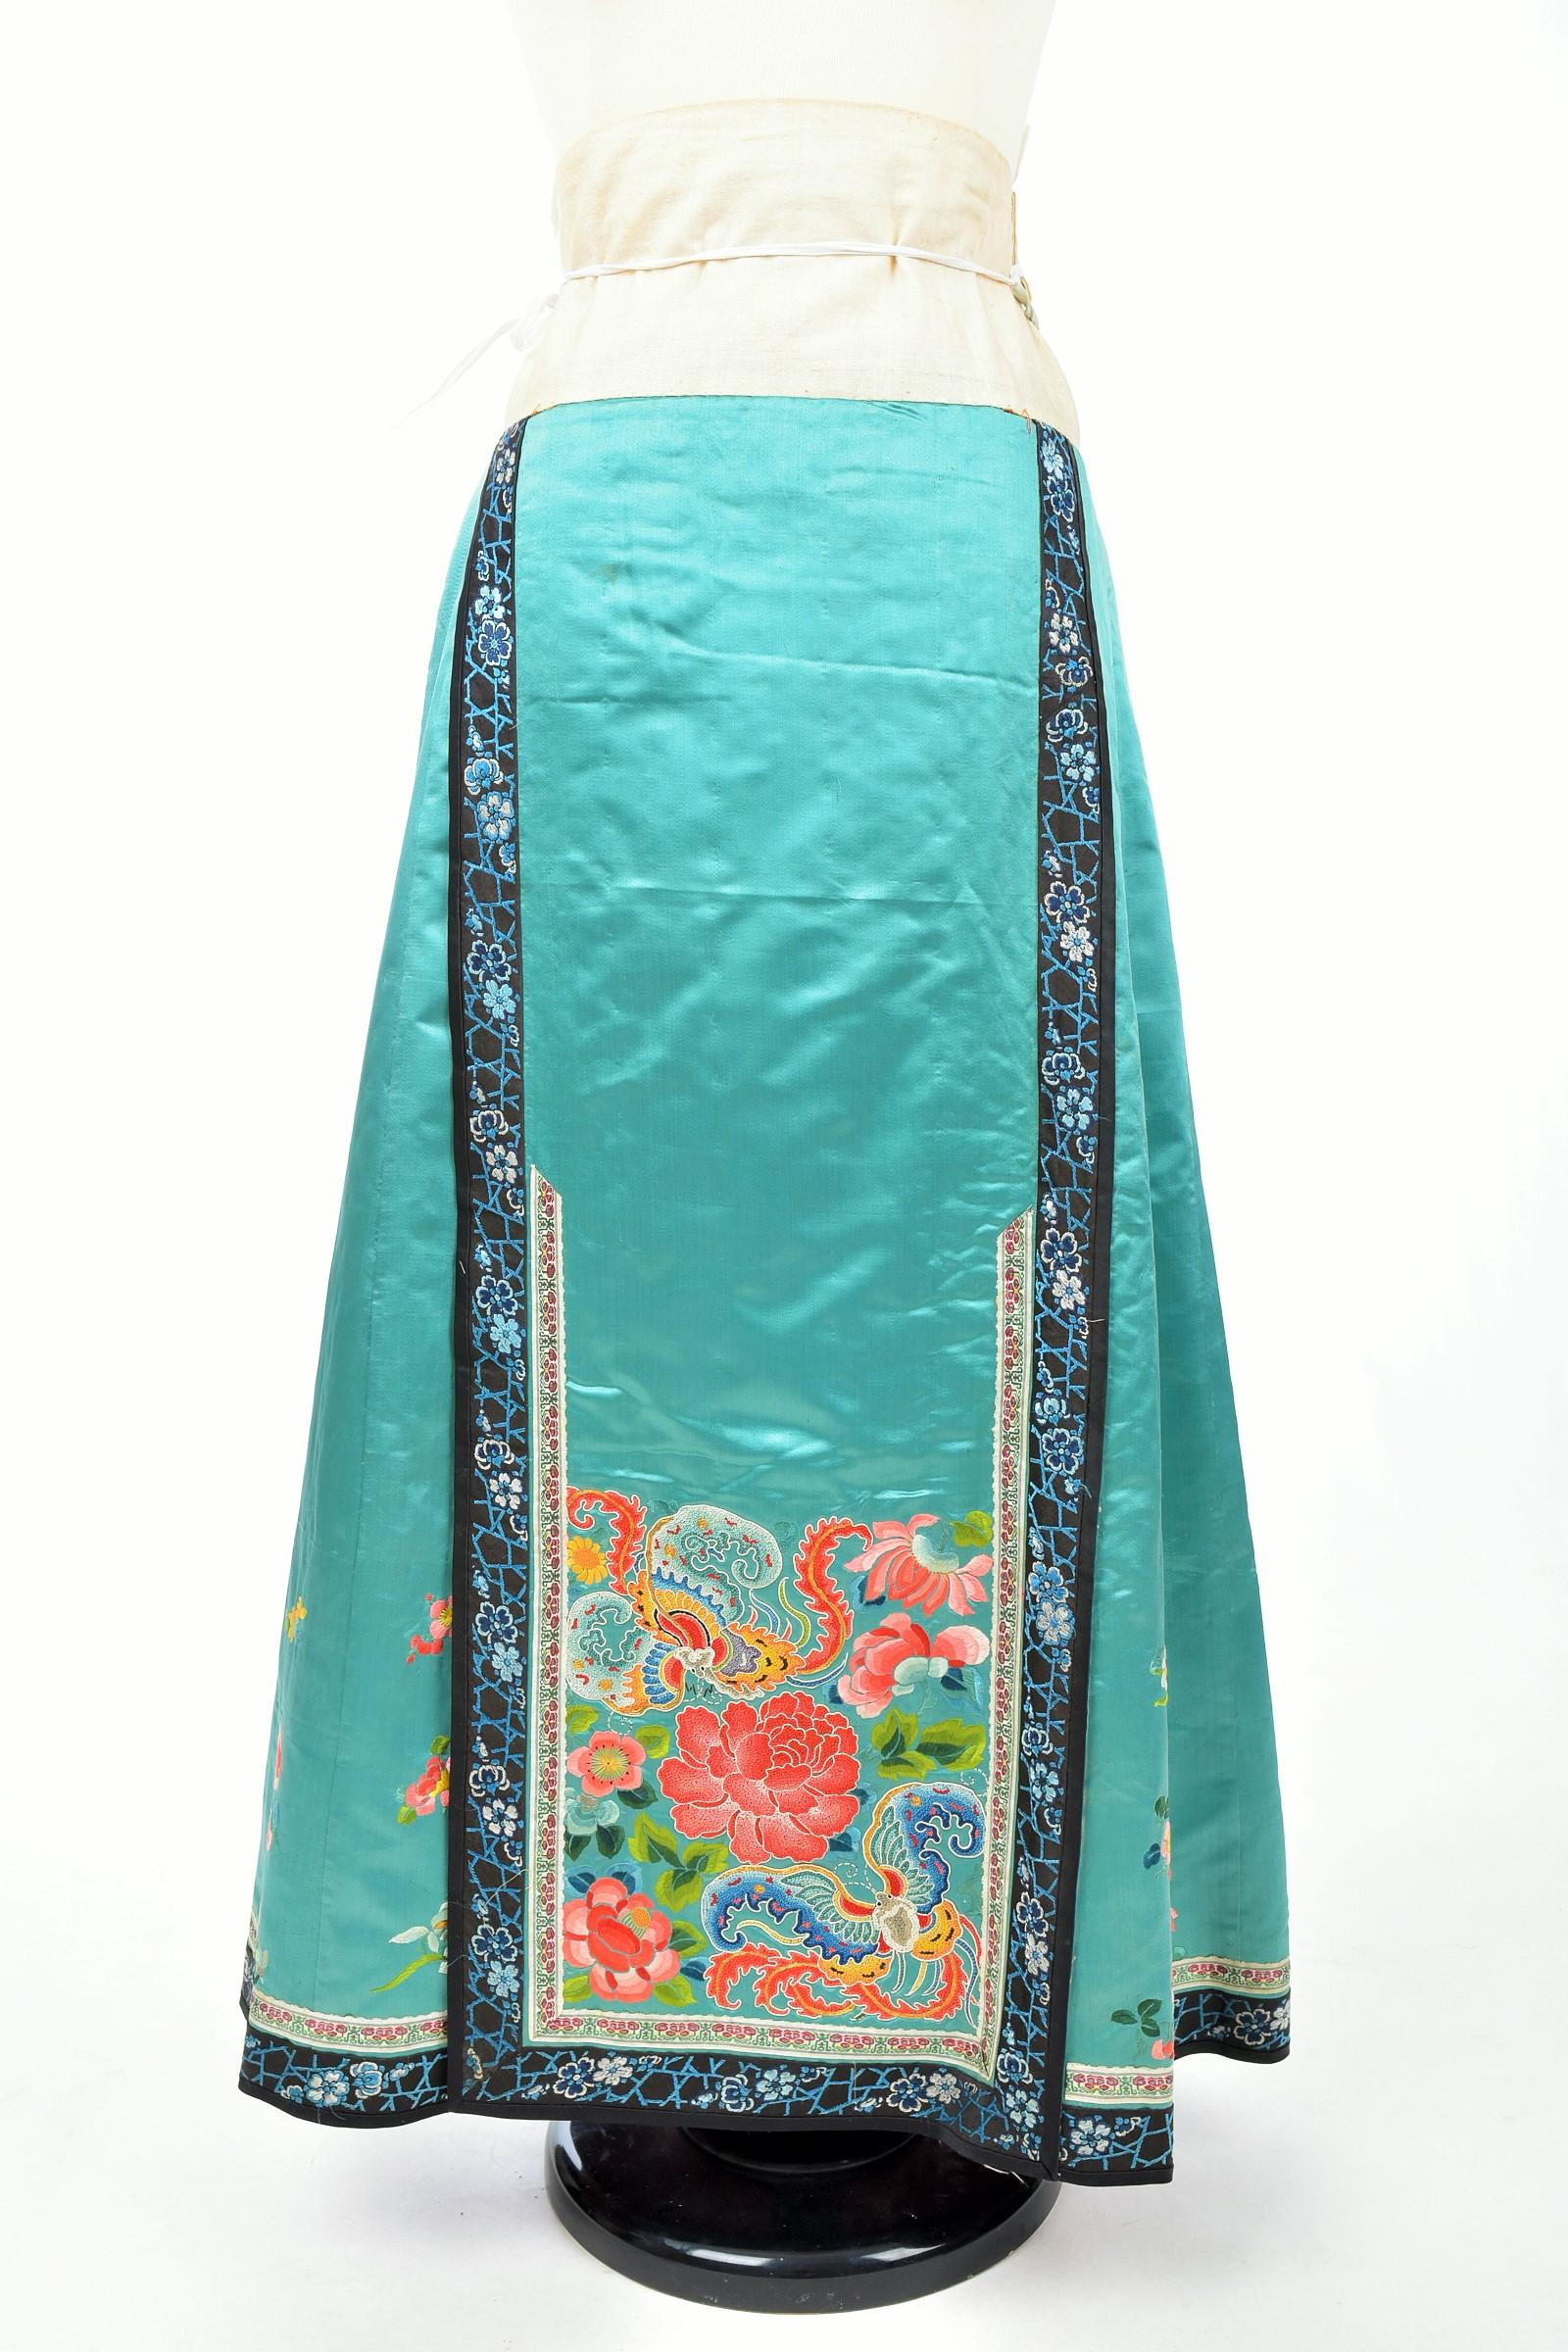 Semi Formal Silk Embroidered Manchu Woman's Skirt and Dress Qing period C.1900 9